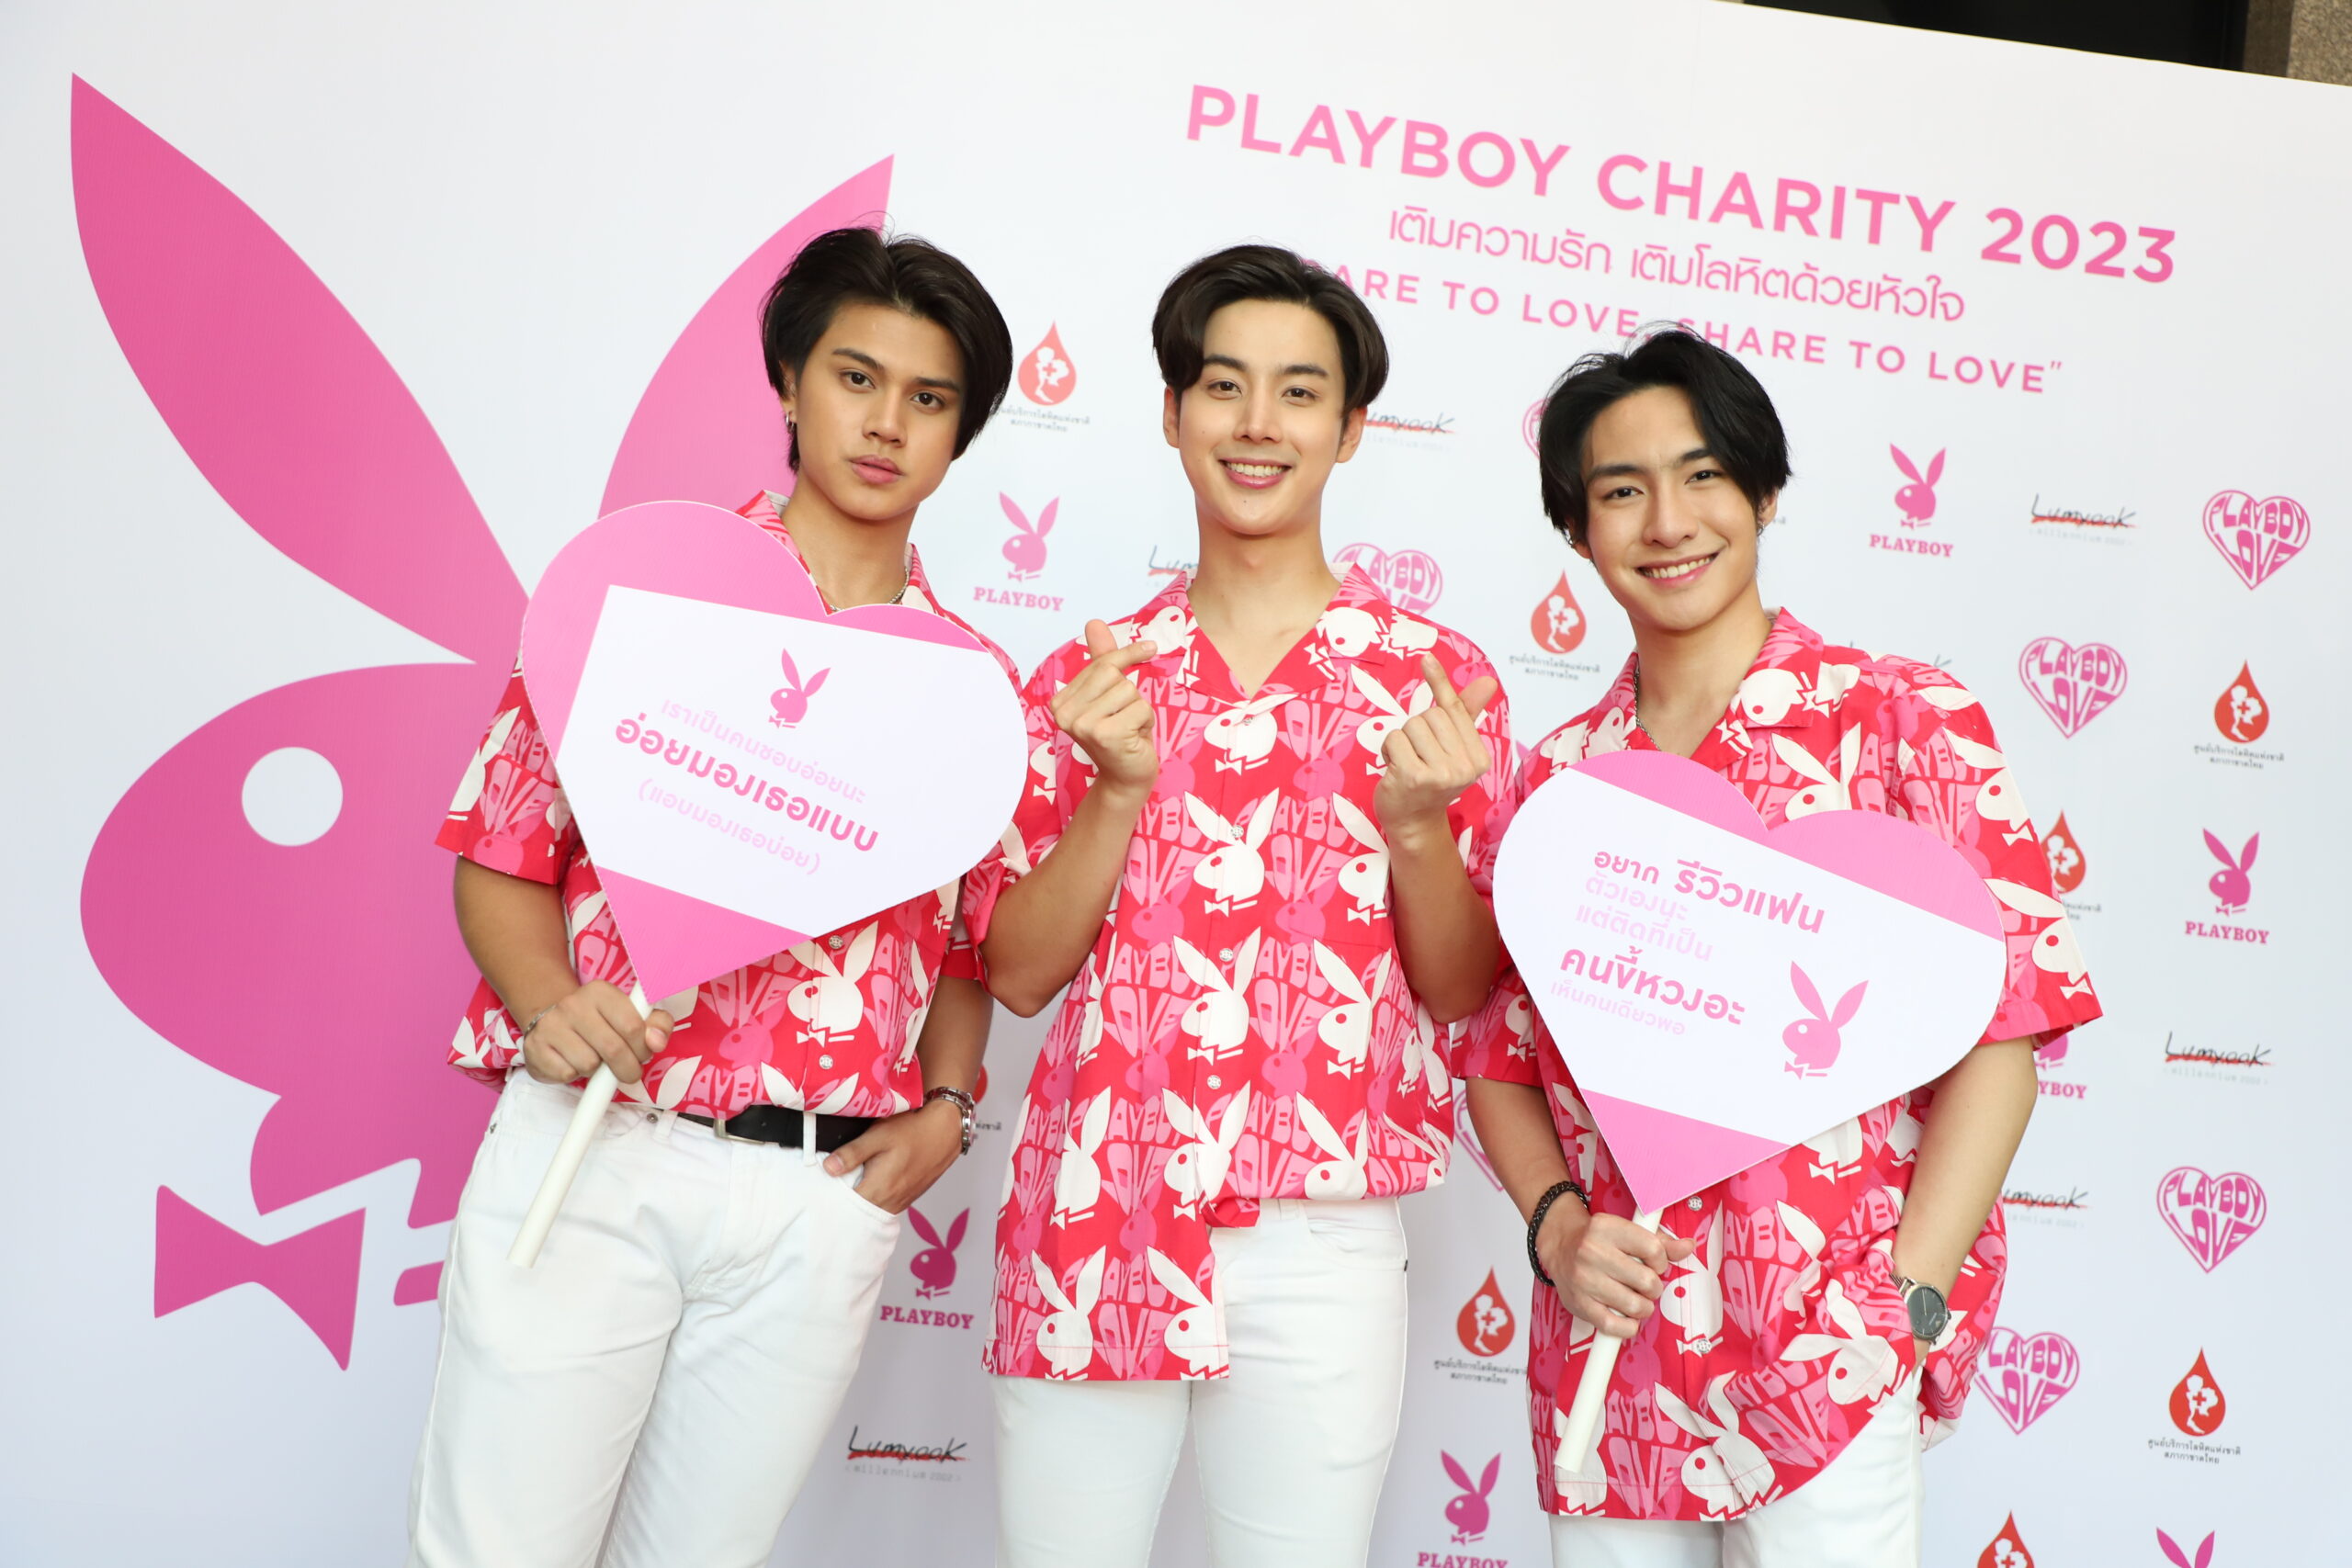 PLAYBOY CHARITY 2023 - DARE TO LOVE, SHARE TO LOVE